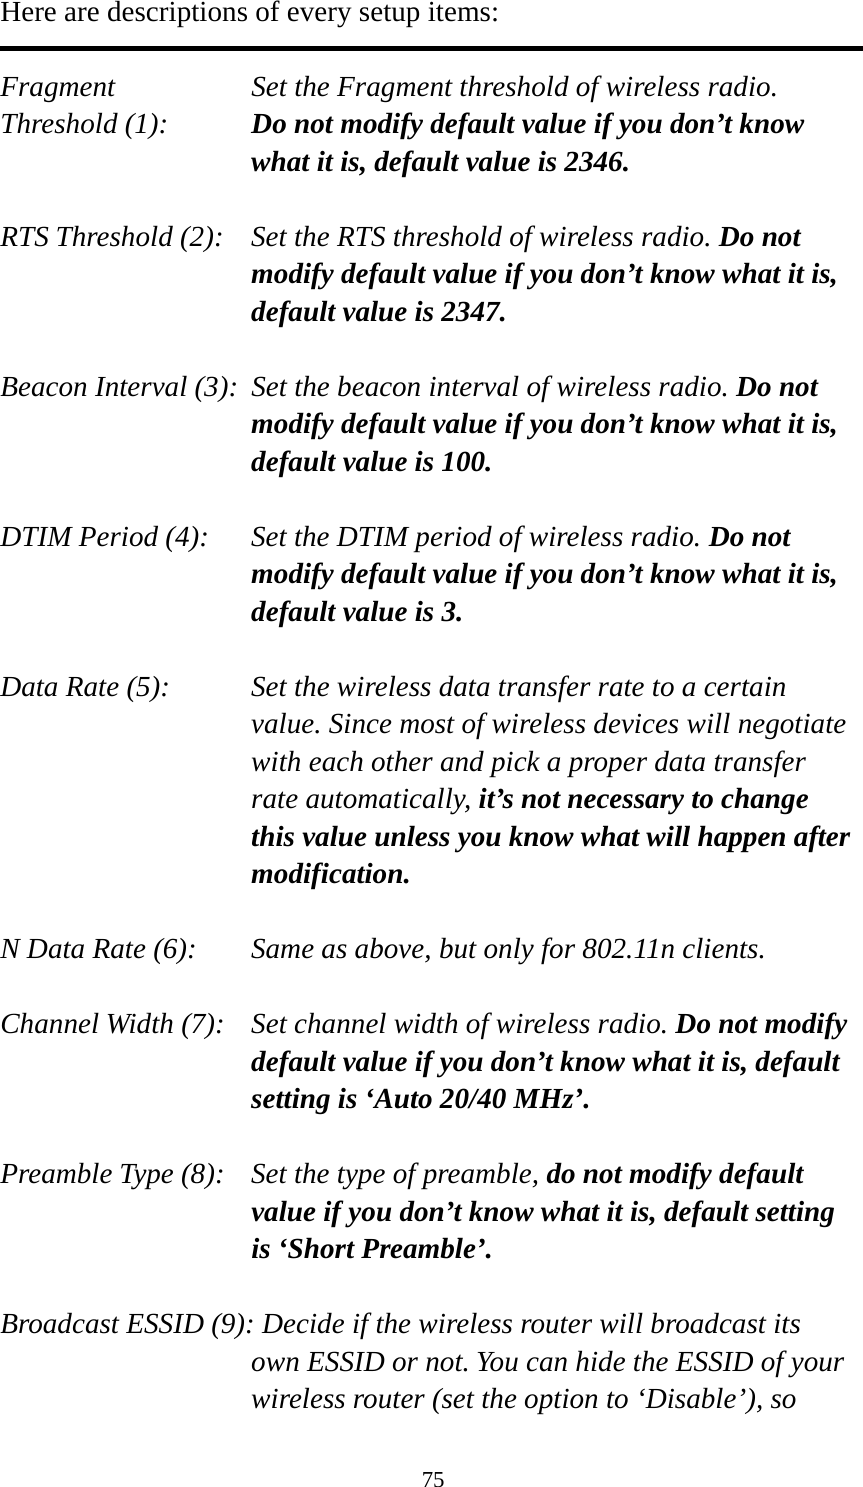 75 Here are descriptions of every setup items:  Fragment  Set the Fragment threshold of wireless radio.    Threshold (1):  Do not modify default value if you don’t know what it is, default value is 2346.  RTS Threshold (2):    Set the RTS threshold of wireless radio. Do not modify default value if you don’t know what it is, default value is 2347.  Beacon Interval (3):  Set the beacon interval of wireless radio. Do not modify default value if you don’t know what it is, default value is 100.  DTIM Period (4):    Set the DTIM period of wireless radio. Do not modify default value if you don’t know what it is, default value is 3.  Data Rate (5):    Set the wireless data transfer rate to a certain value. Since most of wireless devices will negotiate with each other and pick a proper data transfer rate automatically, it’s not necessary to change this value unless you know what will happen after modification.  N Data Rate (6):   Same as above, but only for 802.11n clients.  Channel Width (7):    Set channel width of wireless radio. Do not modify default value if you don’t know what it is, default setting is ‘Auto 20/40 MHz’.  Preamble Type (8):    Set the type of preamble, do not modify default value if you don’t know what it is, default setting is ‘Short Preamble’.  Broadcast ESSID (9): Decide if the wireless router will broadcast its own ESSID or not. You can hide the ESSID of your wireless router (set the option to ‘Disable’), so 